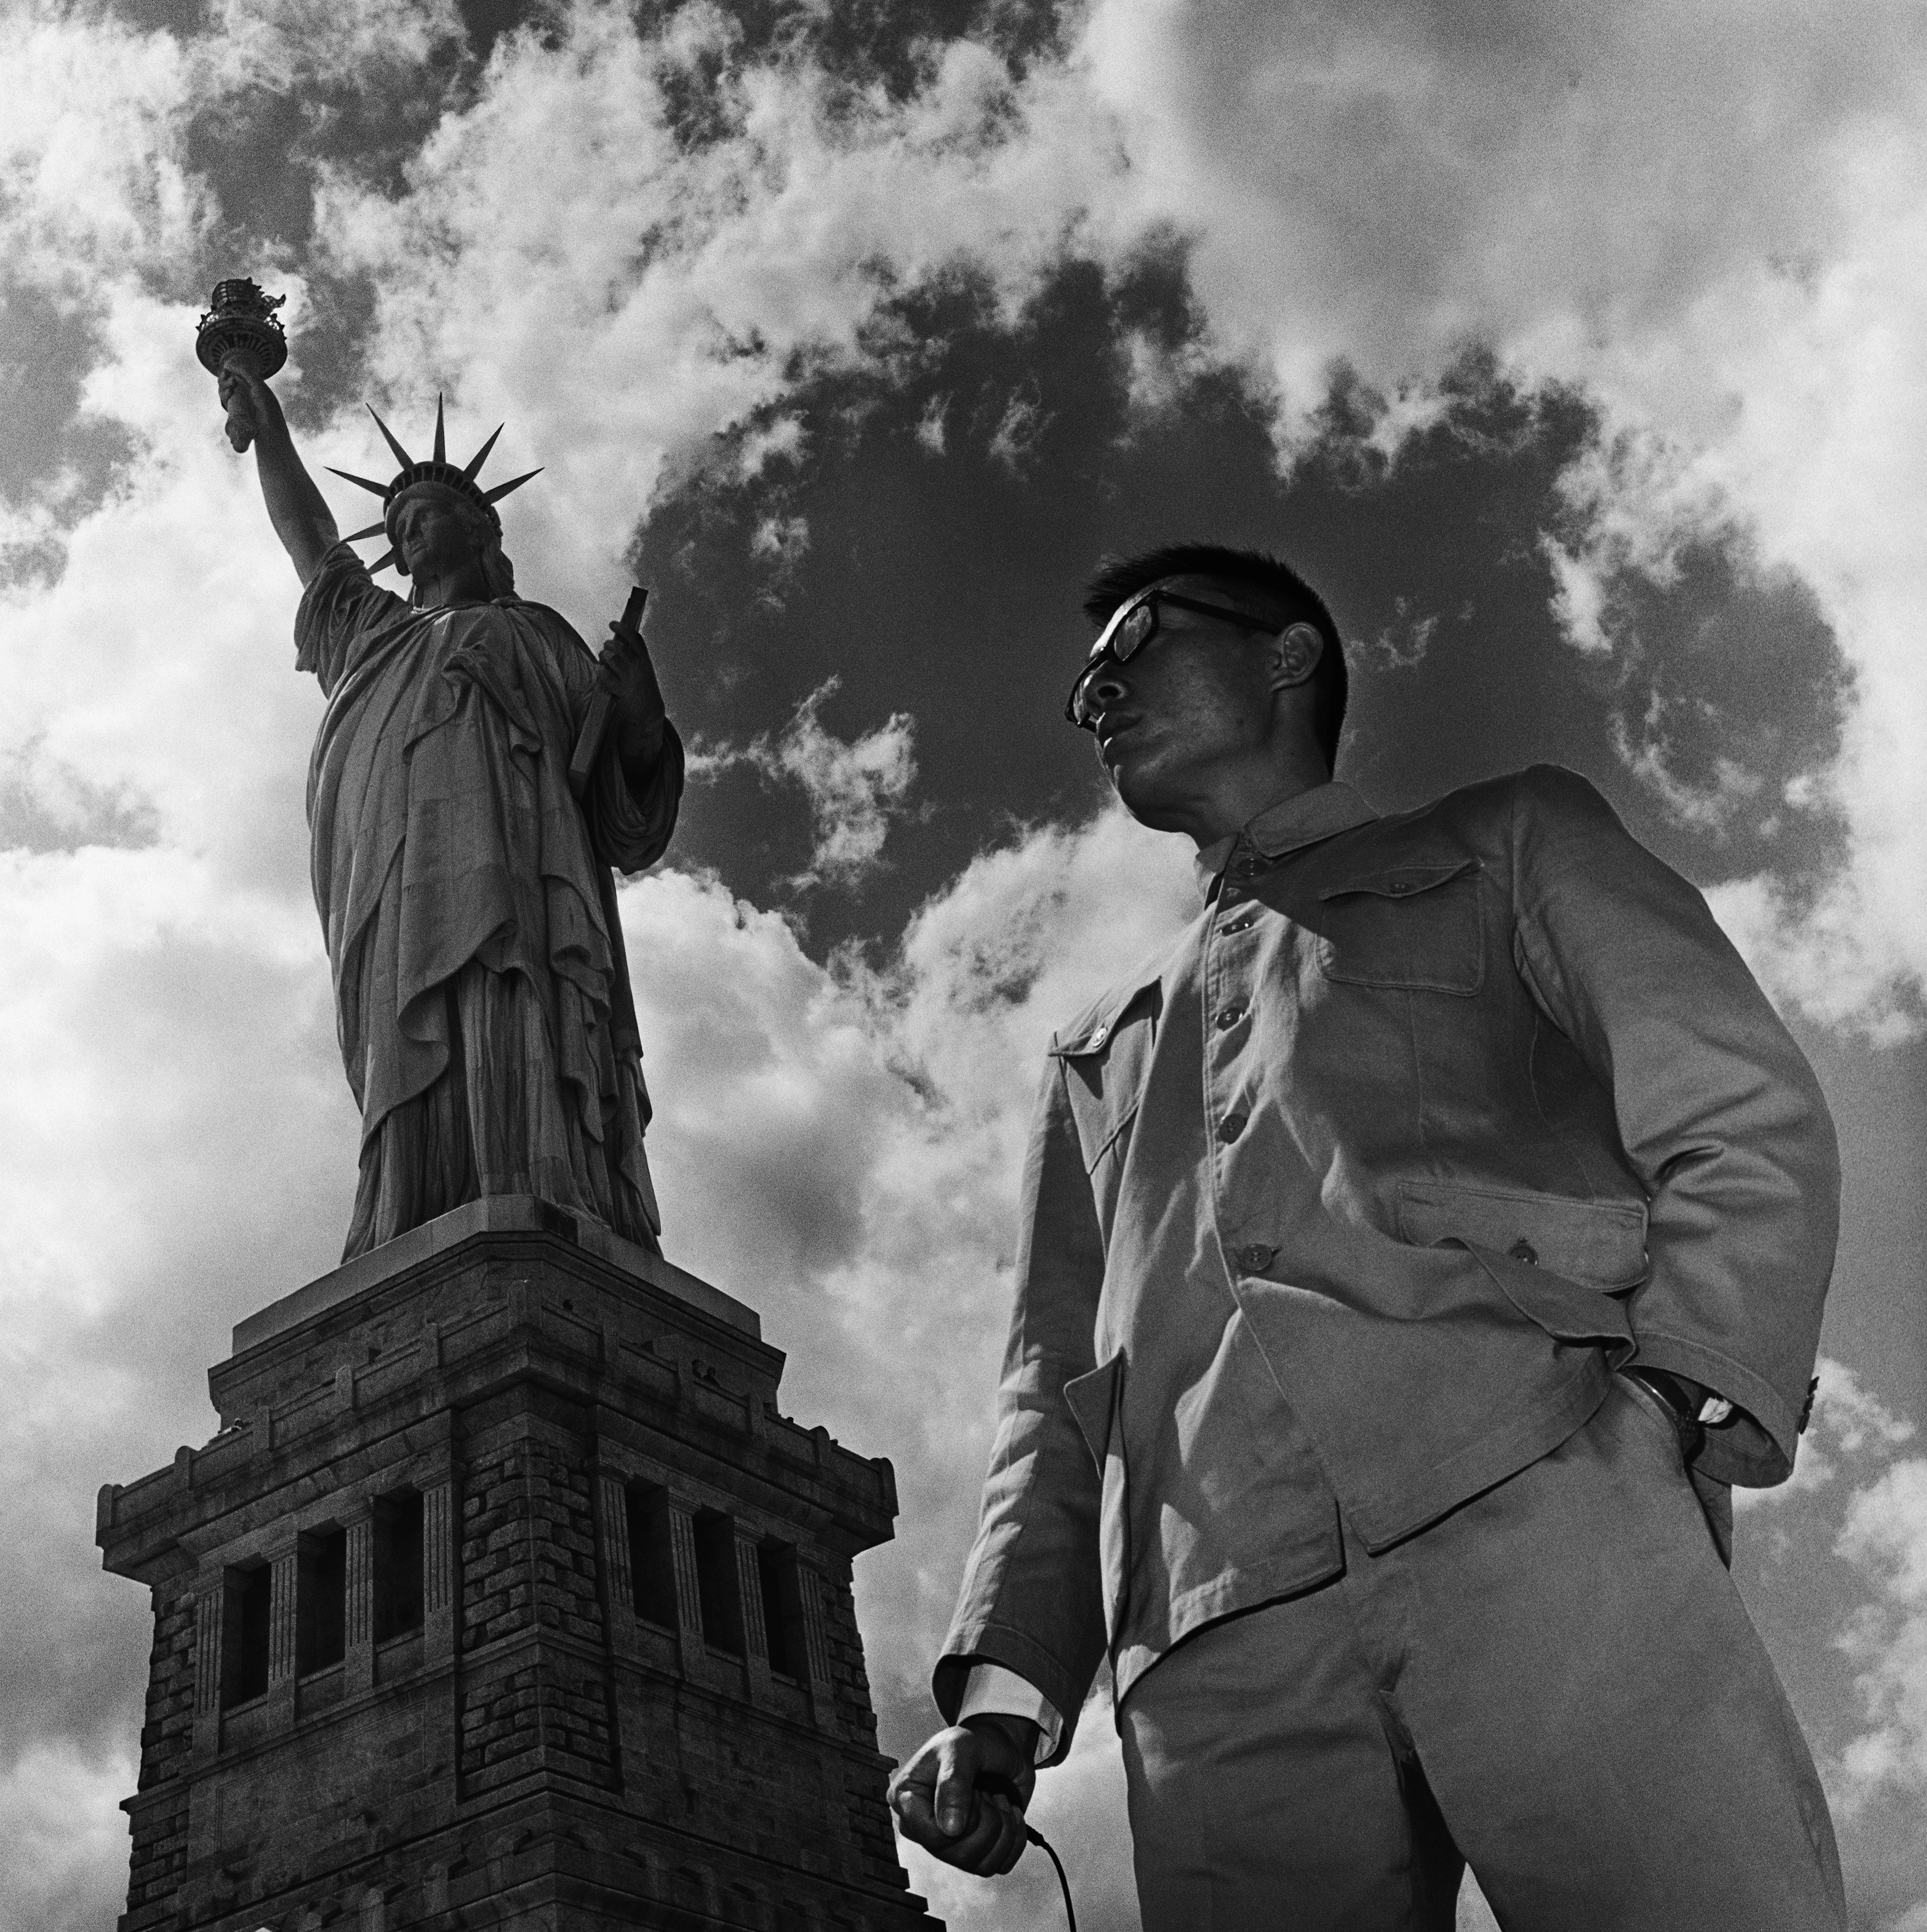  a man in a Zhongshan suit stood in front of the statue of liberty